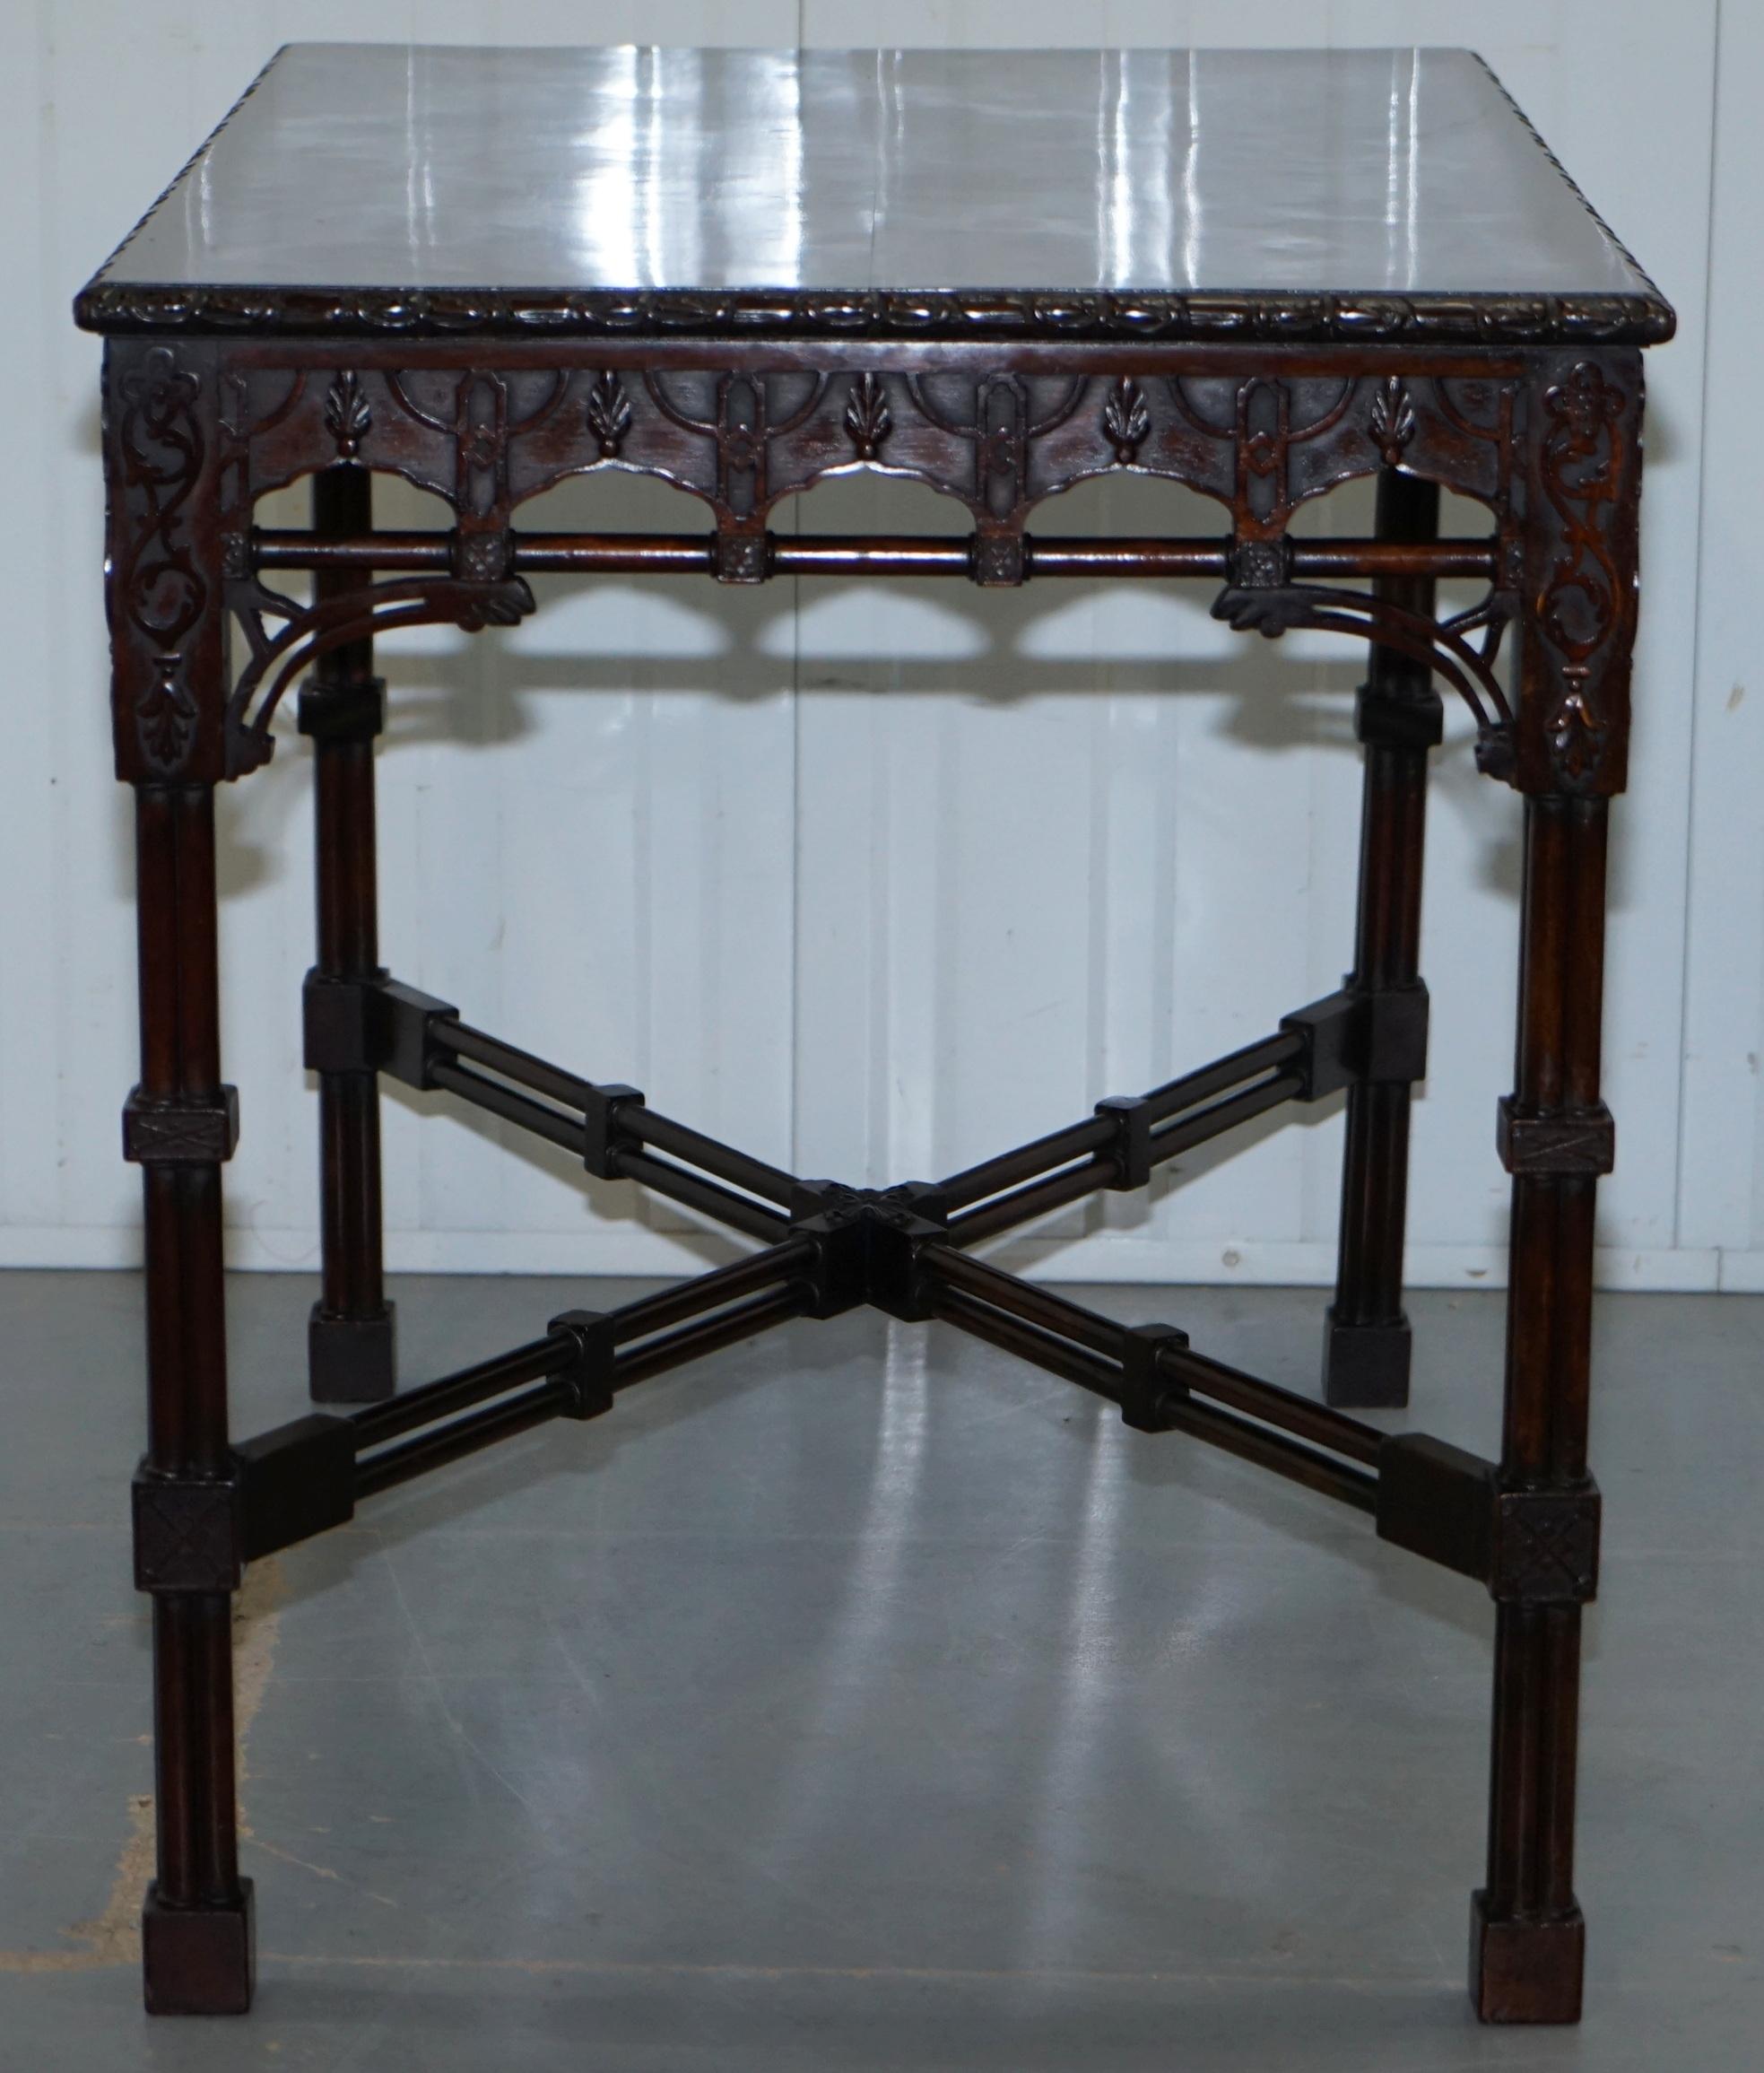 Rare 19th Century Thomas Chippendale Clustered Column Leg Silver Tea Side Table For Sale 7